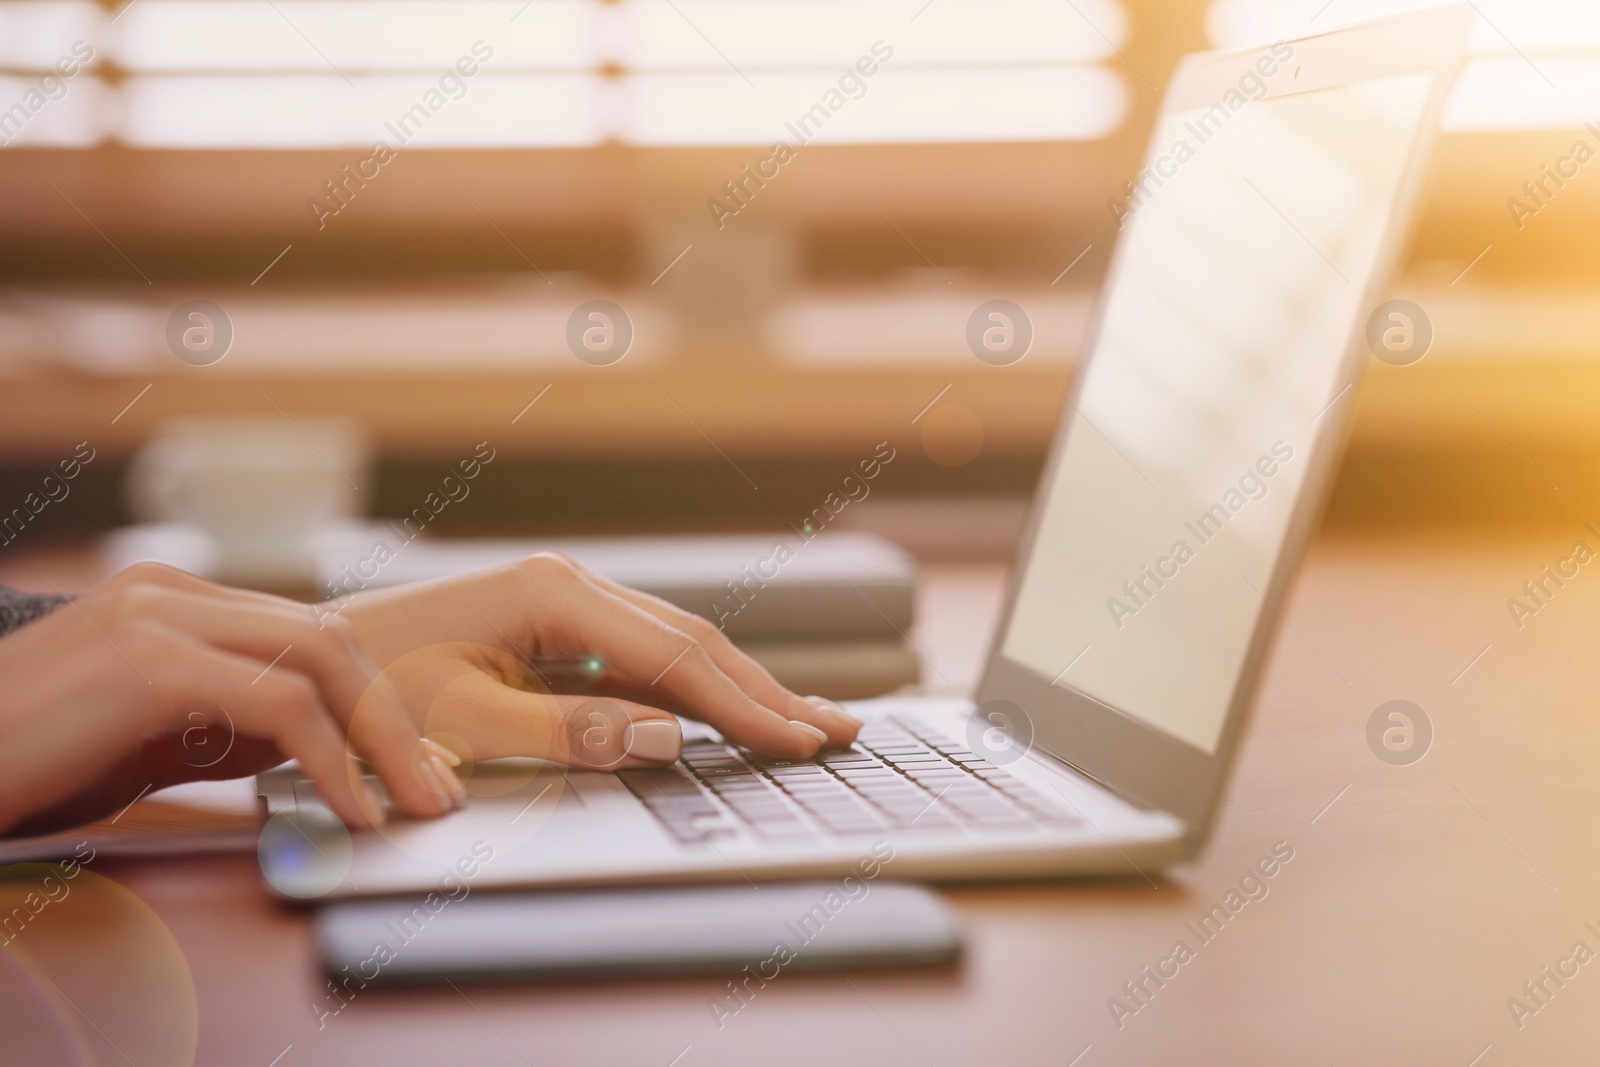 Image of Woman working with laptop at table indoors, closeup